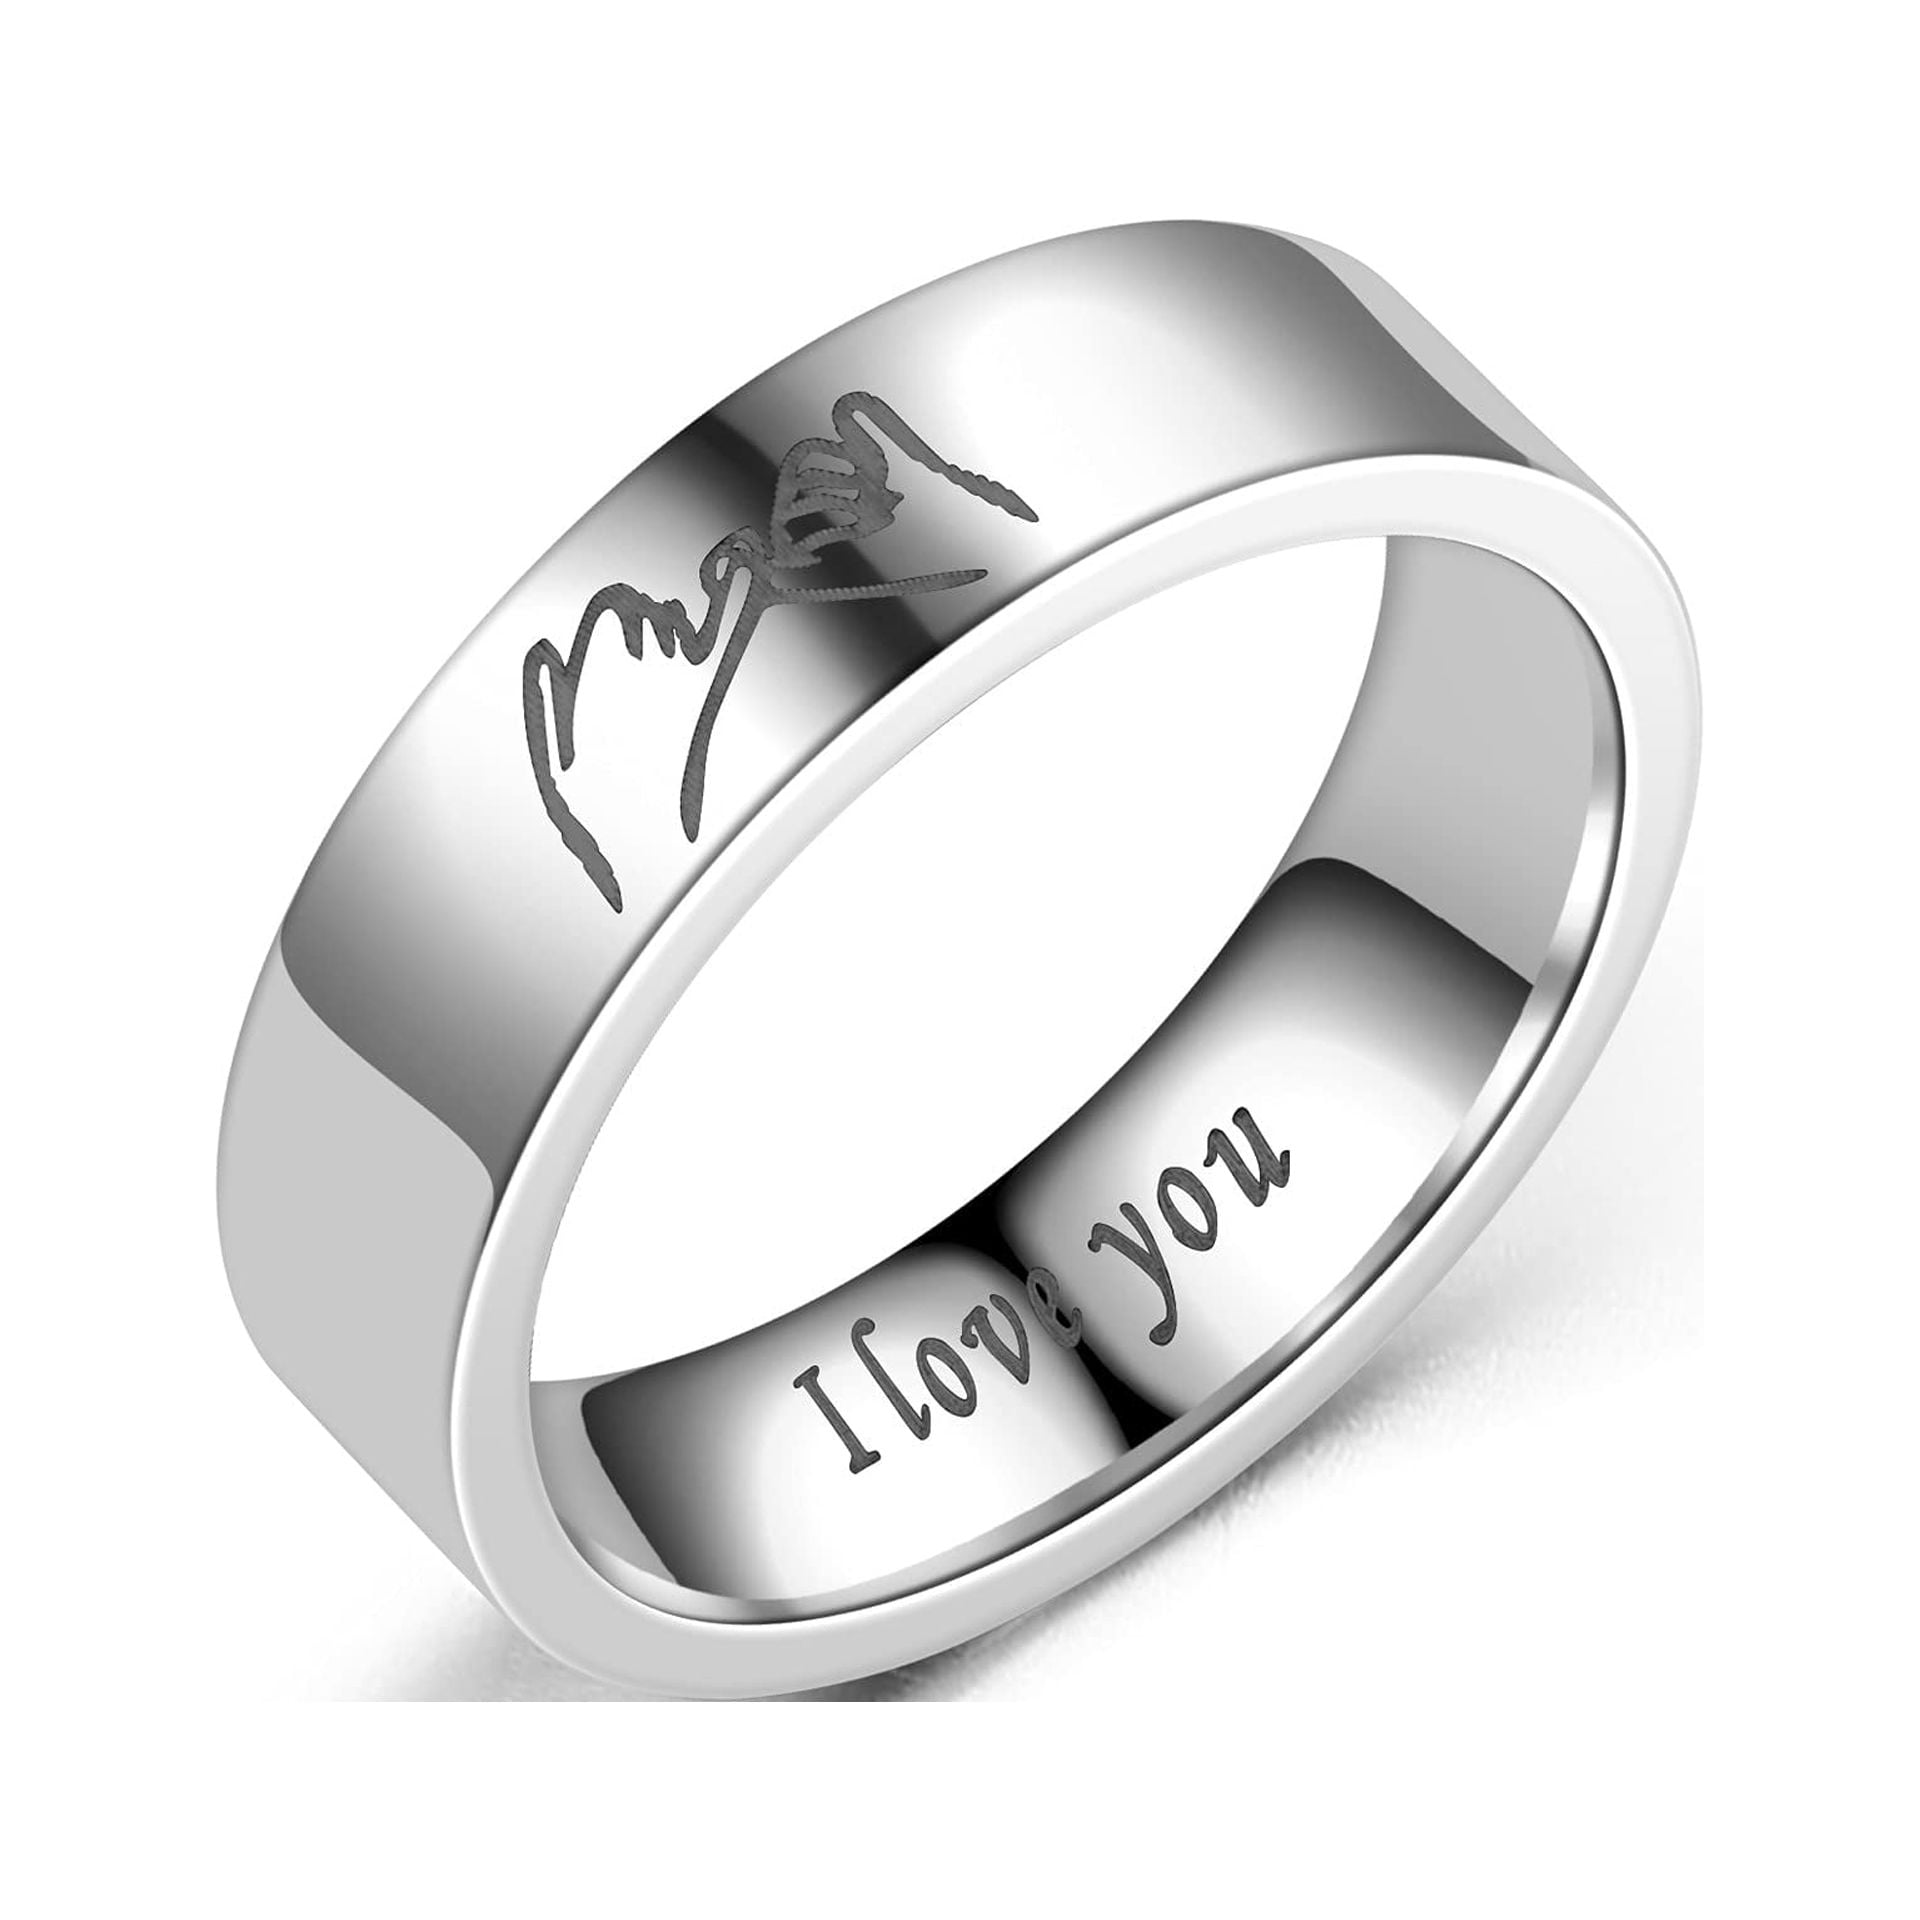 6MM Stainless Steel Ring I Love You Promise Band Couples Wedding Band Engagement Rings for Girls Women size 8 718f9b37 b6cb 4835 a0d4 f03825d13ce3.c05ad1c42fc7b80248d983603bf99121